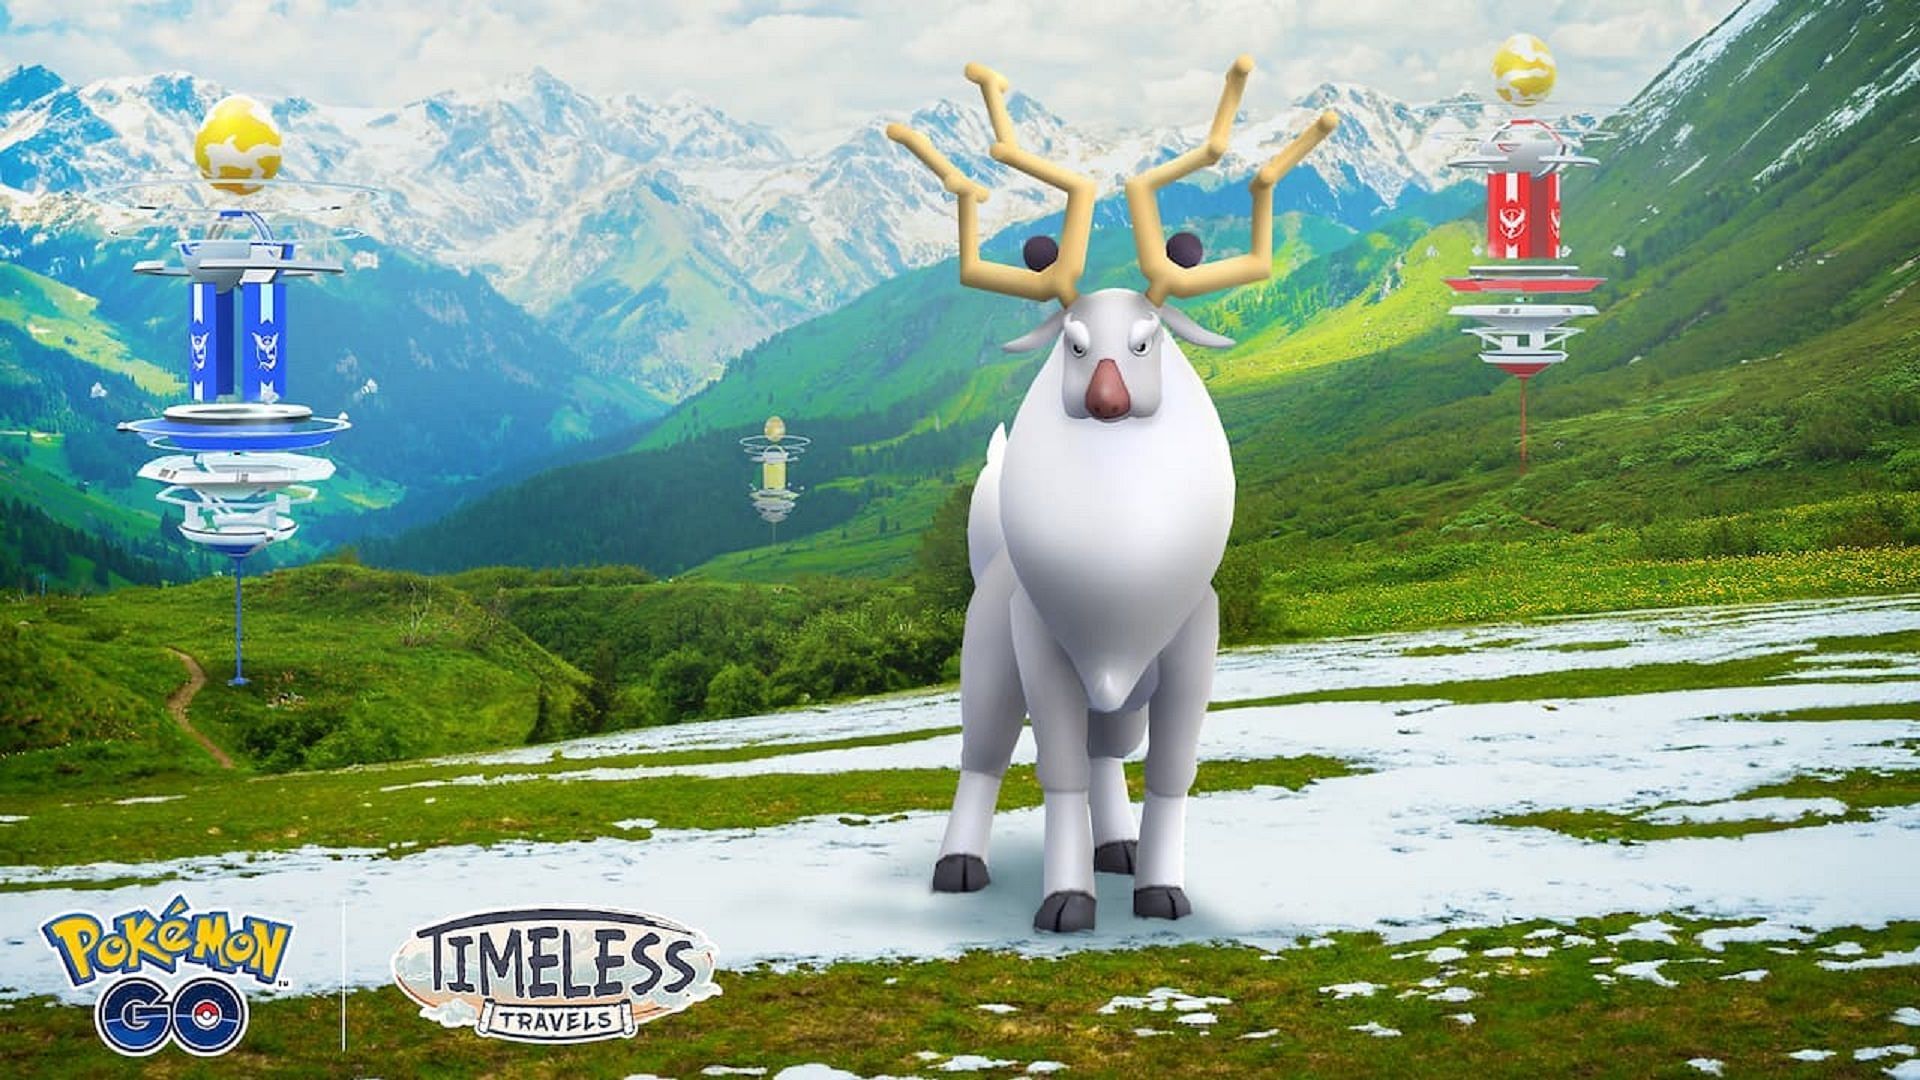 Wyrdeer stands on a frosty mountaintop in Pokemon GO.